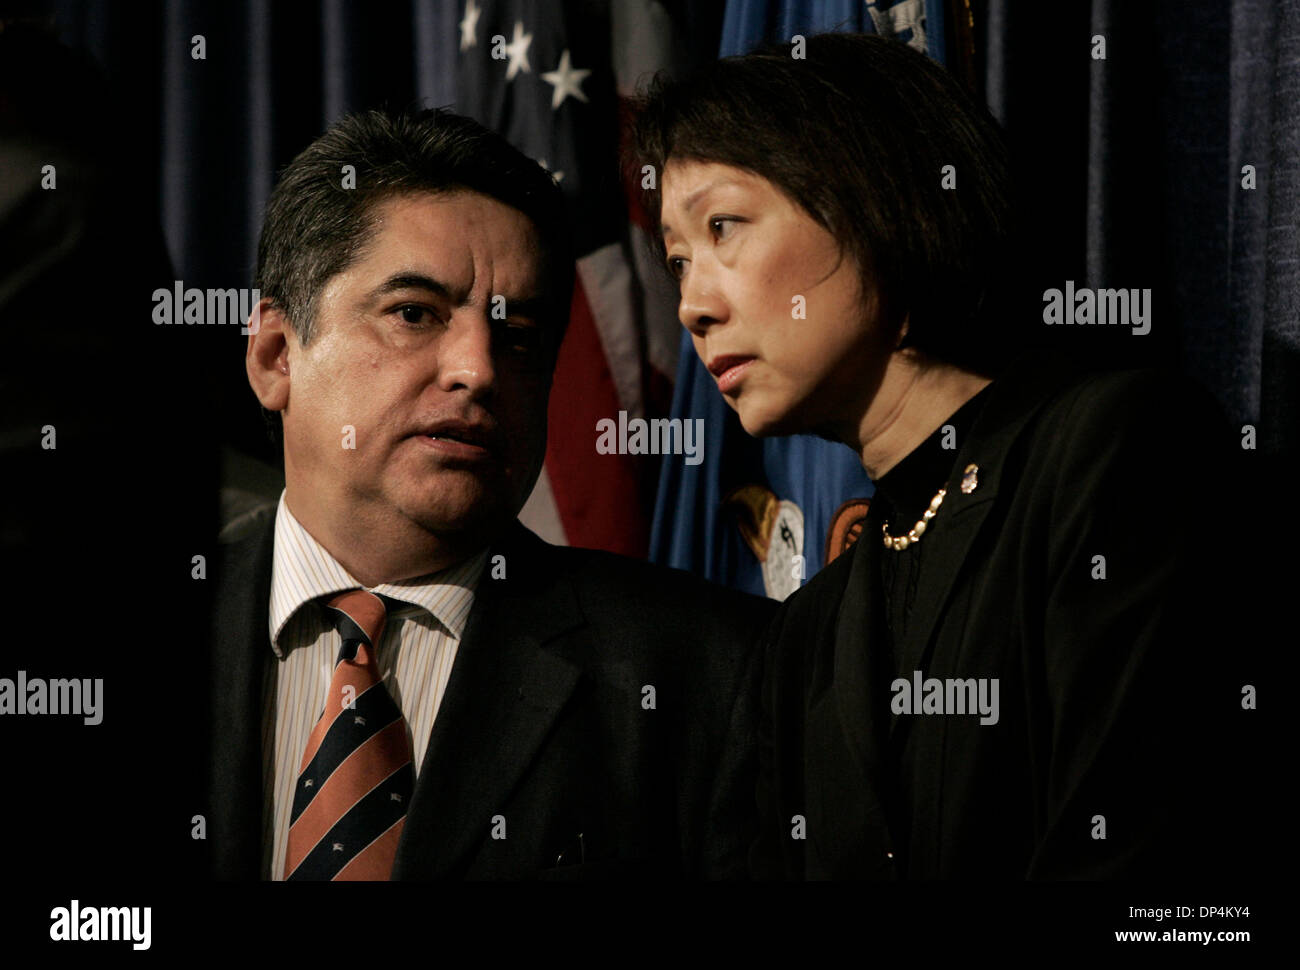 Aug 17, 2006; San Diego, CA, USA; Mexico's Deputy Attorney General JOSE LUIS SANTIAGO VASCONCELOS, left, and  US Attorney CAROL LAM, right talk  during a press conference discussing the arrest on Monday August 14, 2006 in international waters off Baja California of  Francisco Javier Arellano Felix, the kingpin of the Arellano-Felix drug cartel. Arrested along with Arellano Felix we Stock Photo